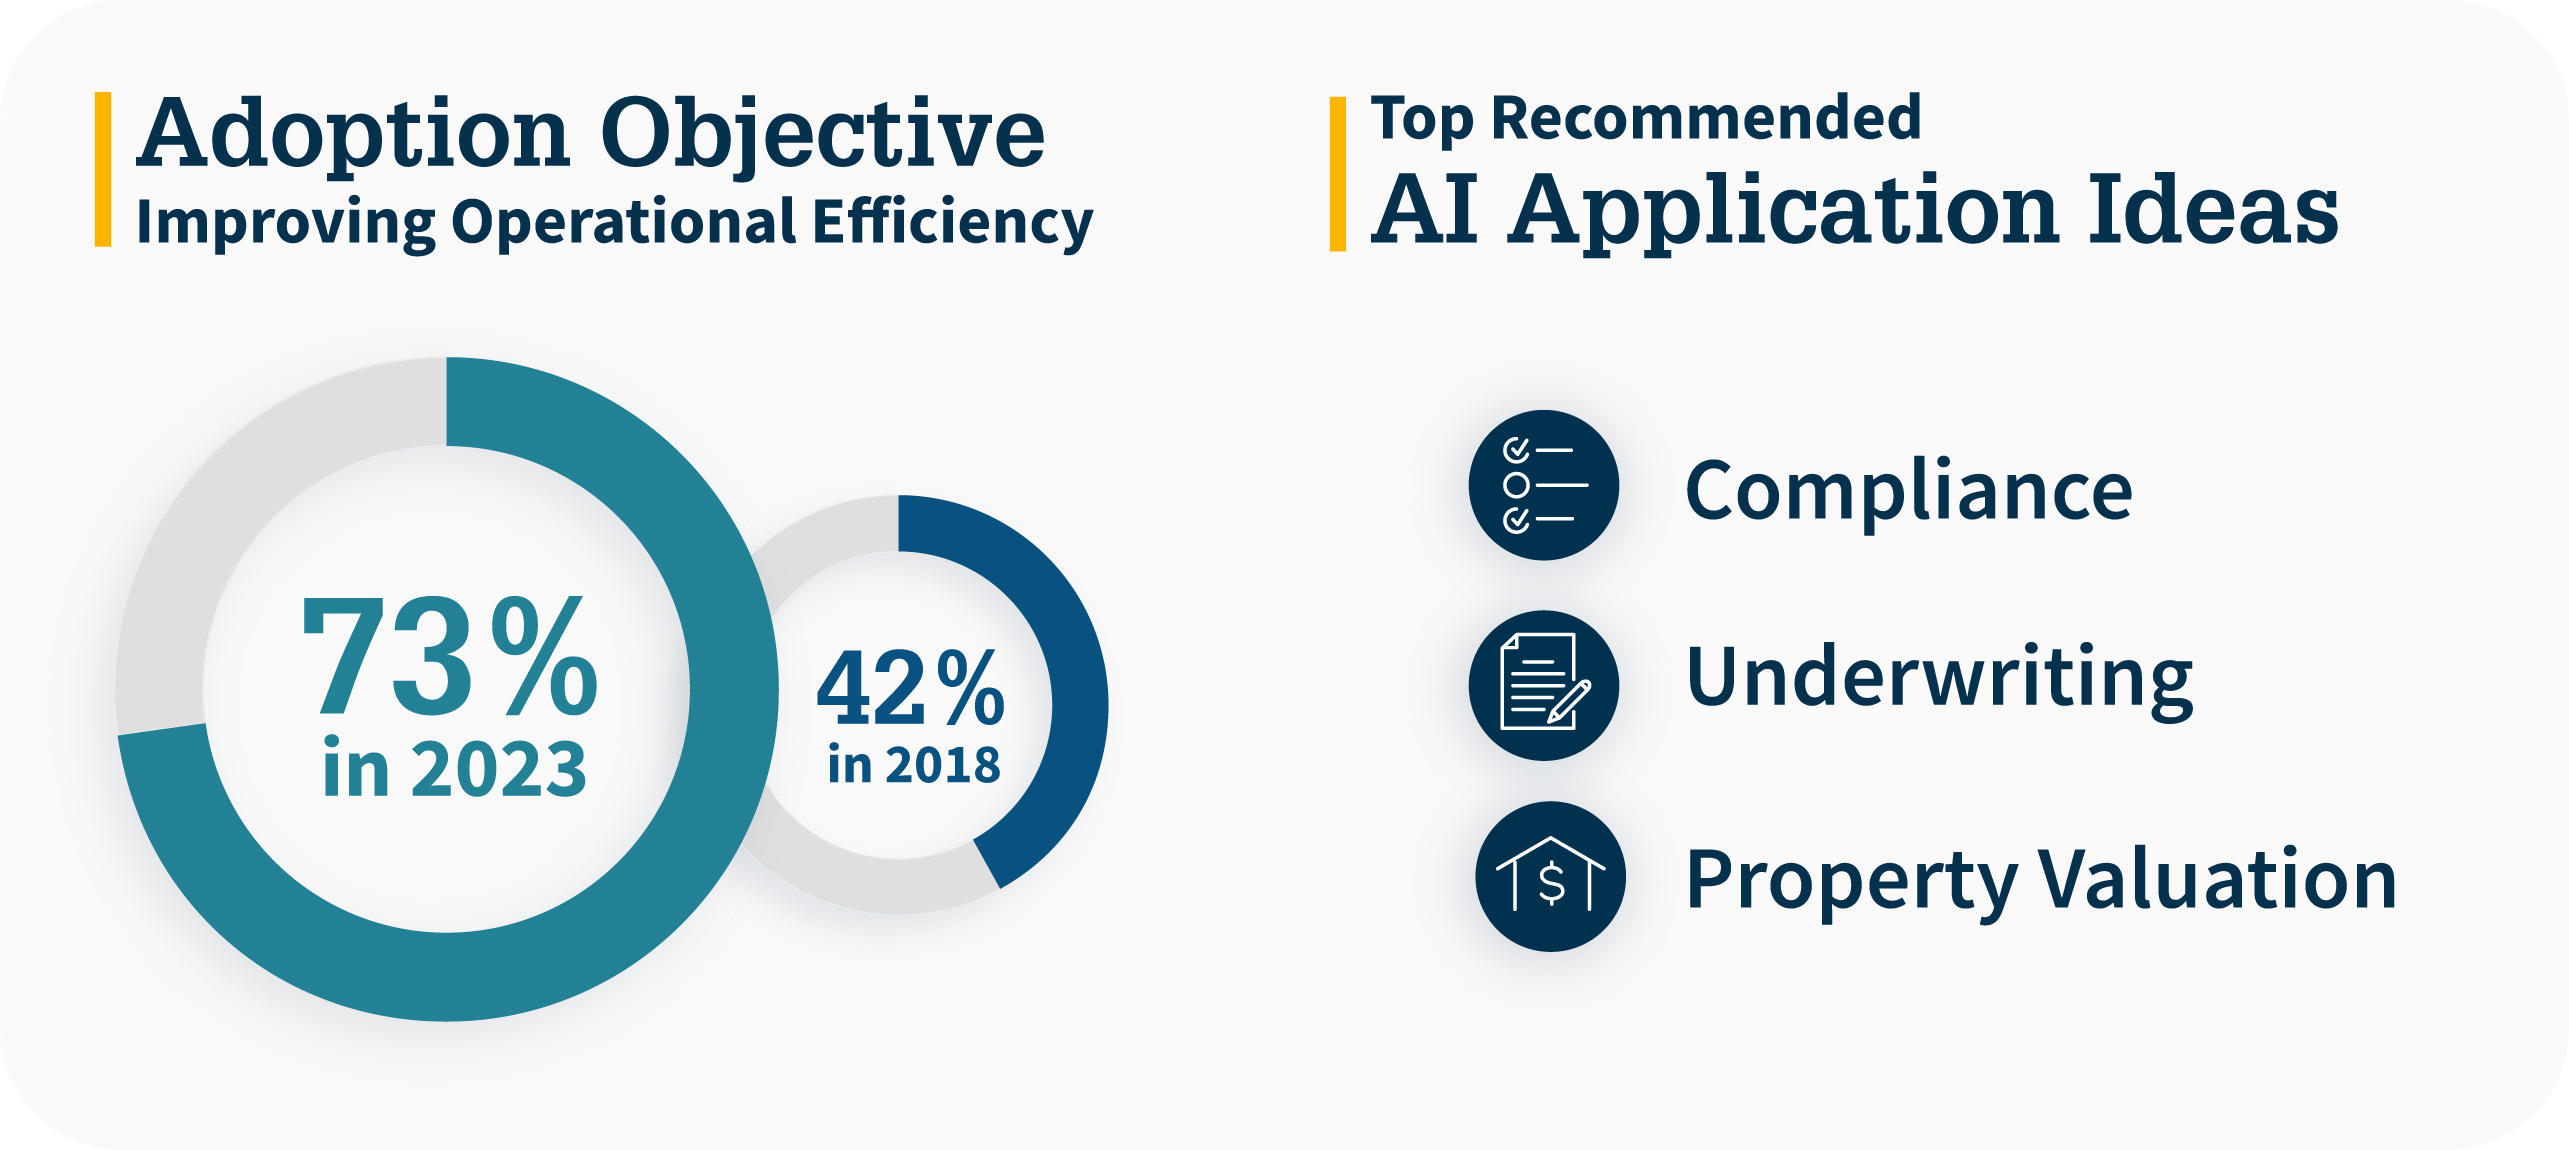 Adoption Objective and Top Recommended AI Application Ideas